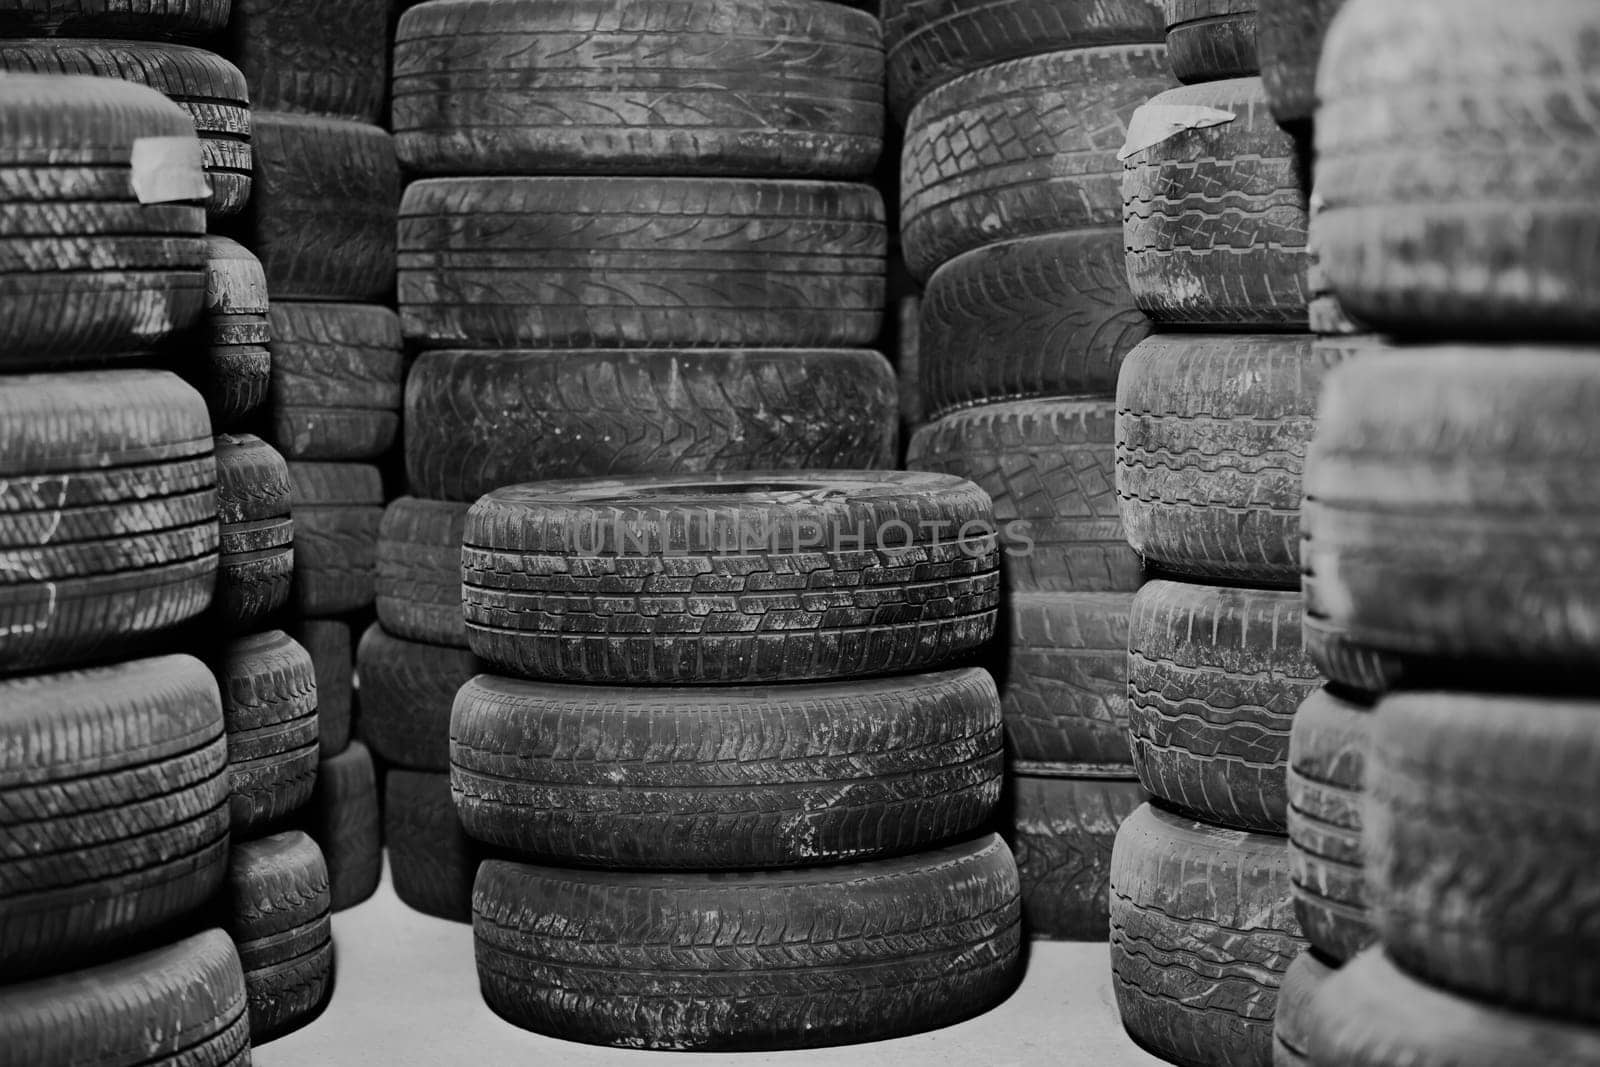 Worn out or used car tires in warehouse, service center, stored tires, transportation concept by Kadula